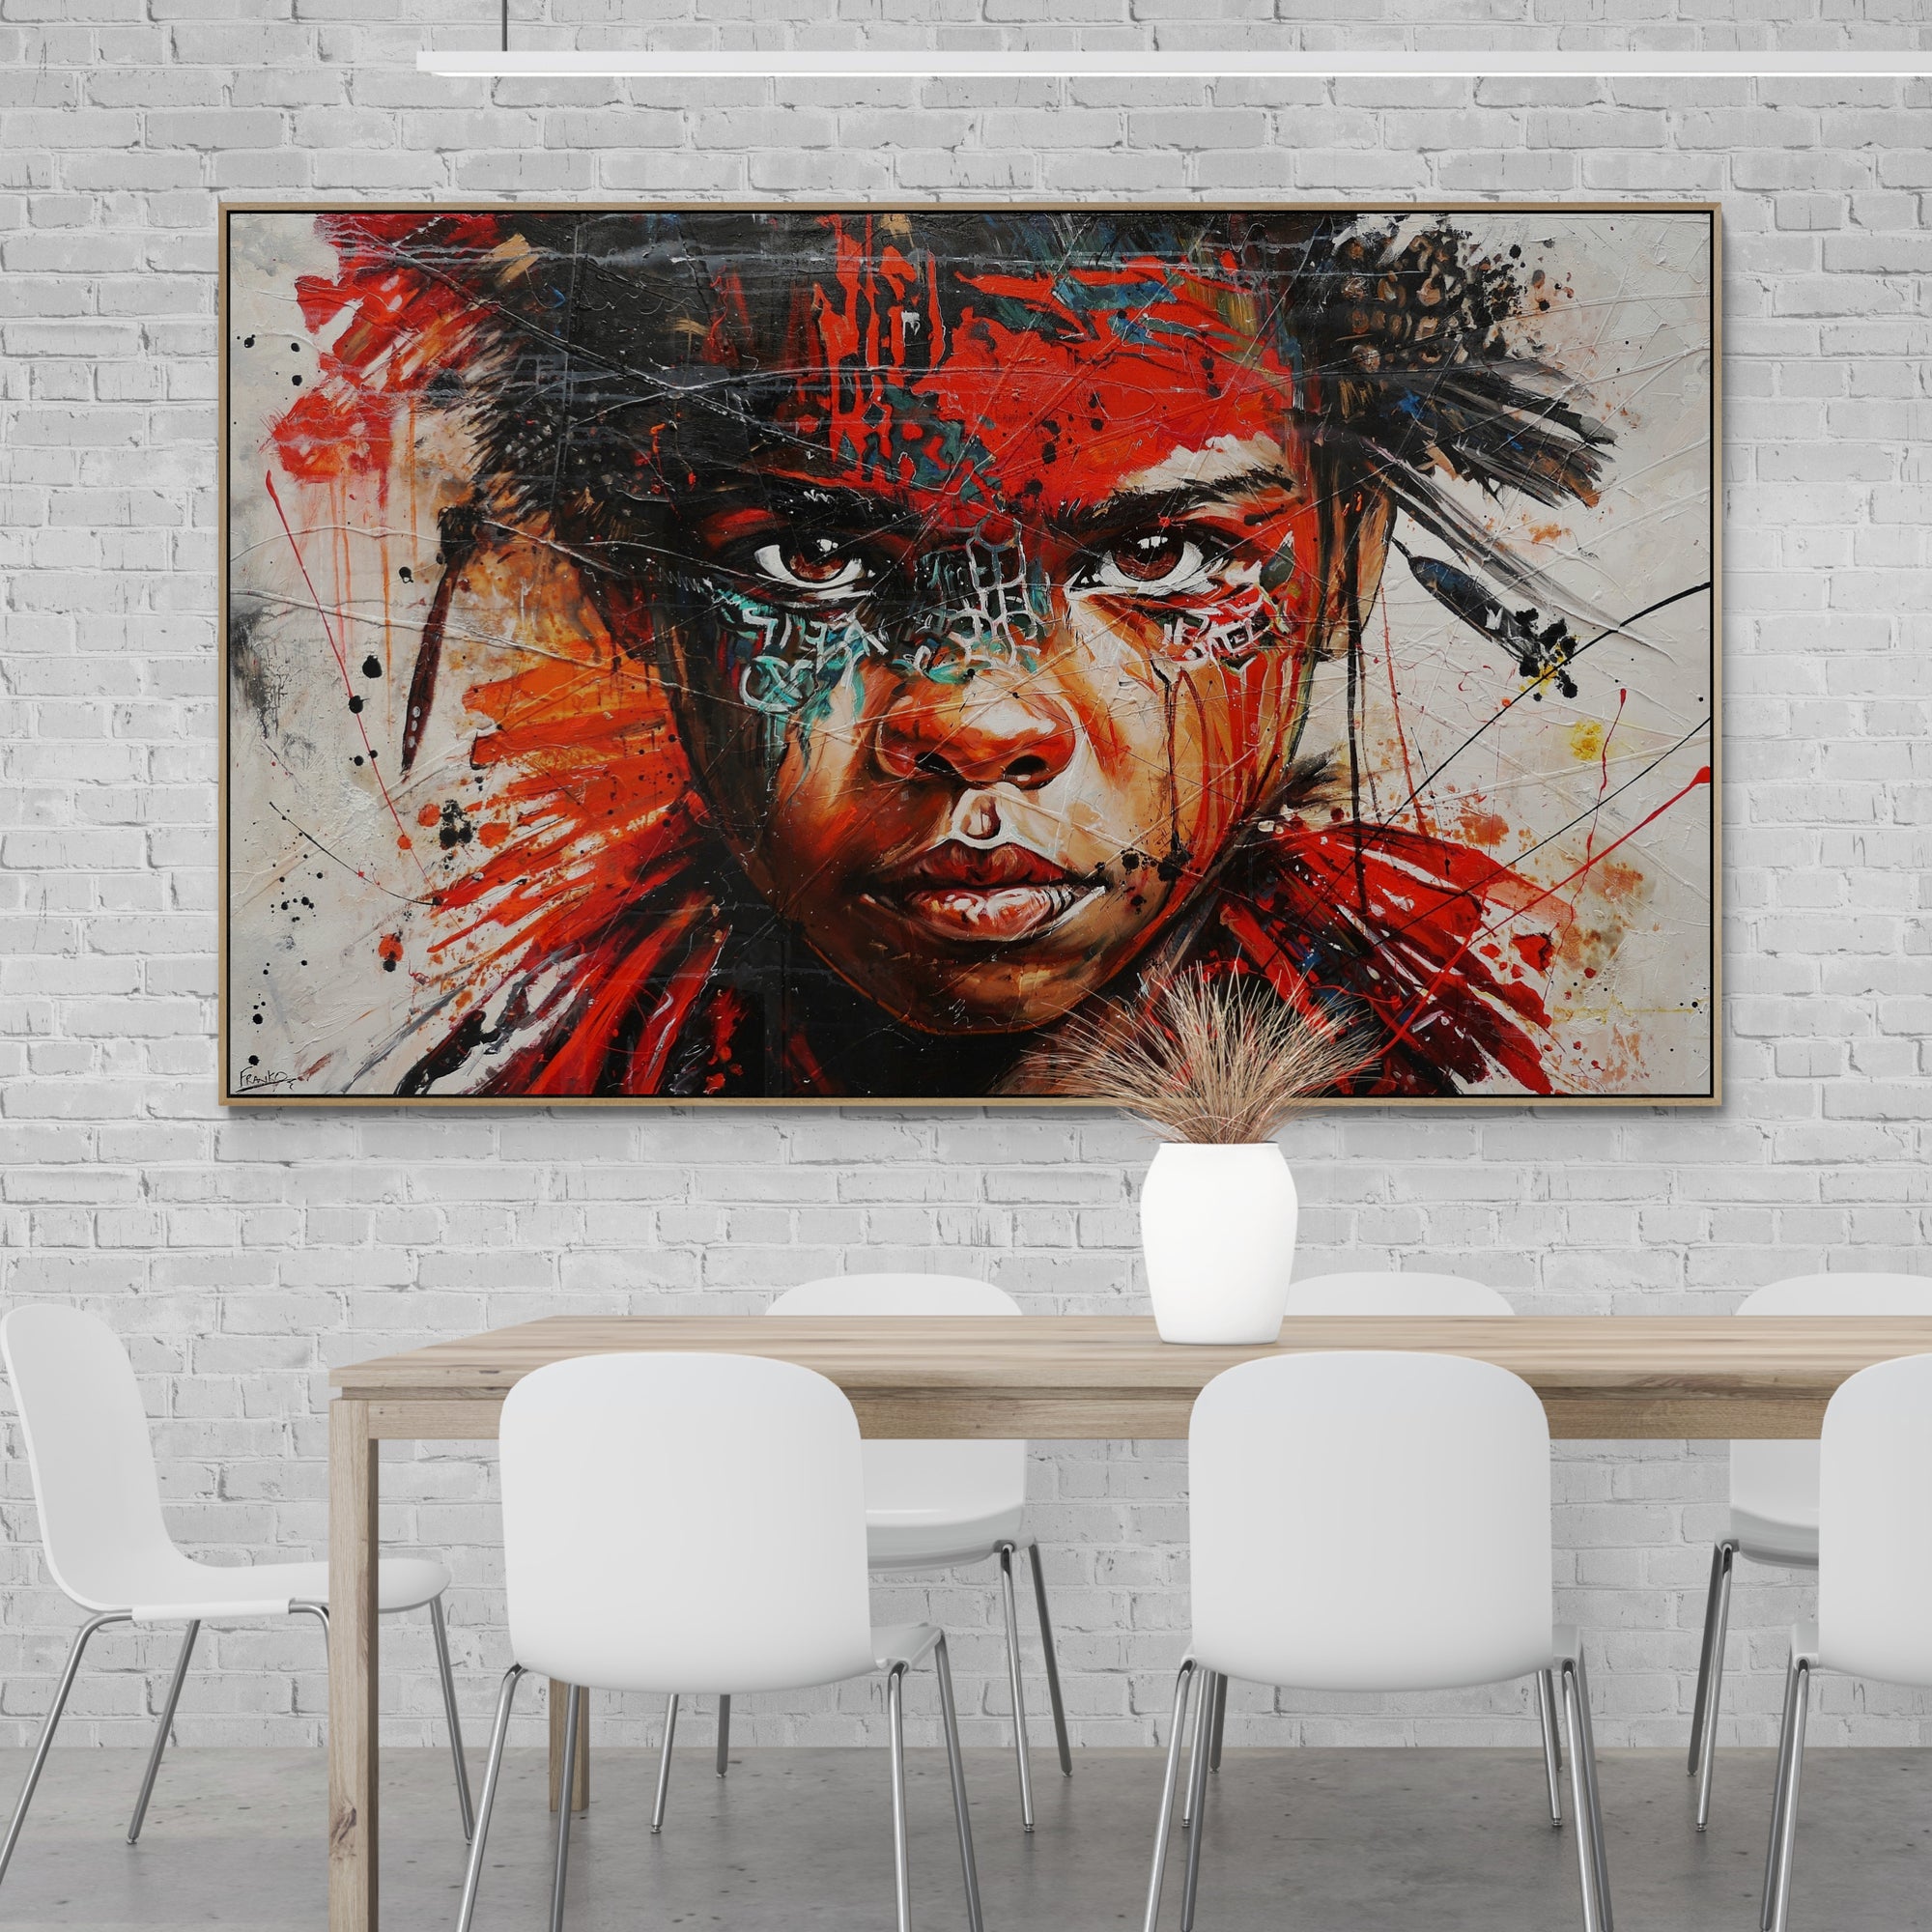 Scarlett Warrior 200cm x 120cm Brave and Beautiful Abstract Framed Textured Painting